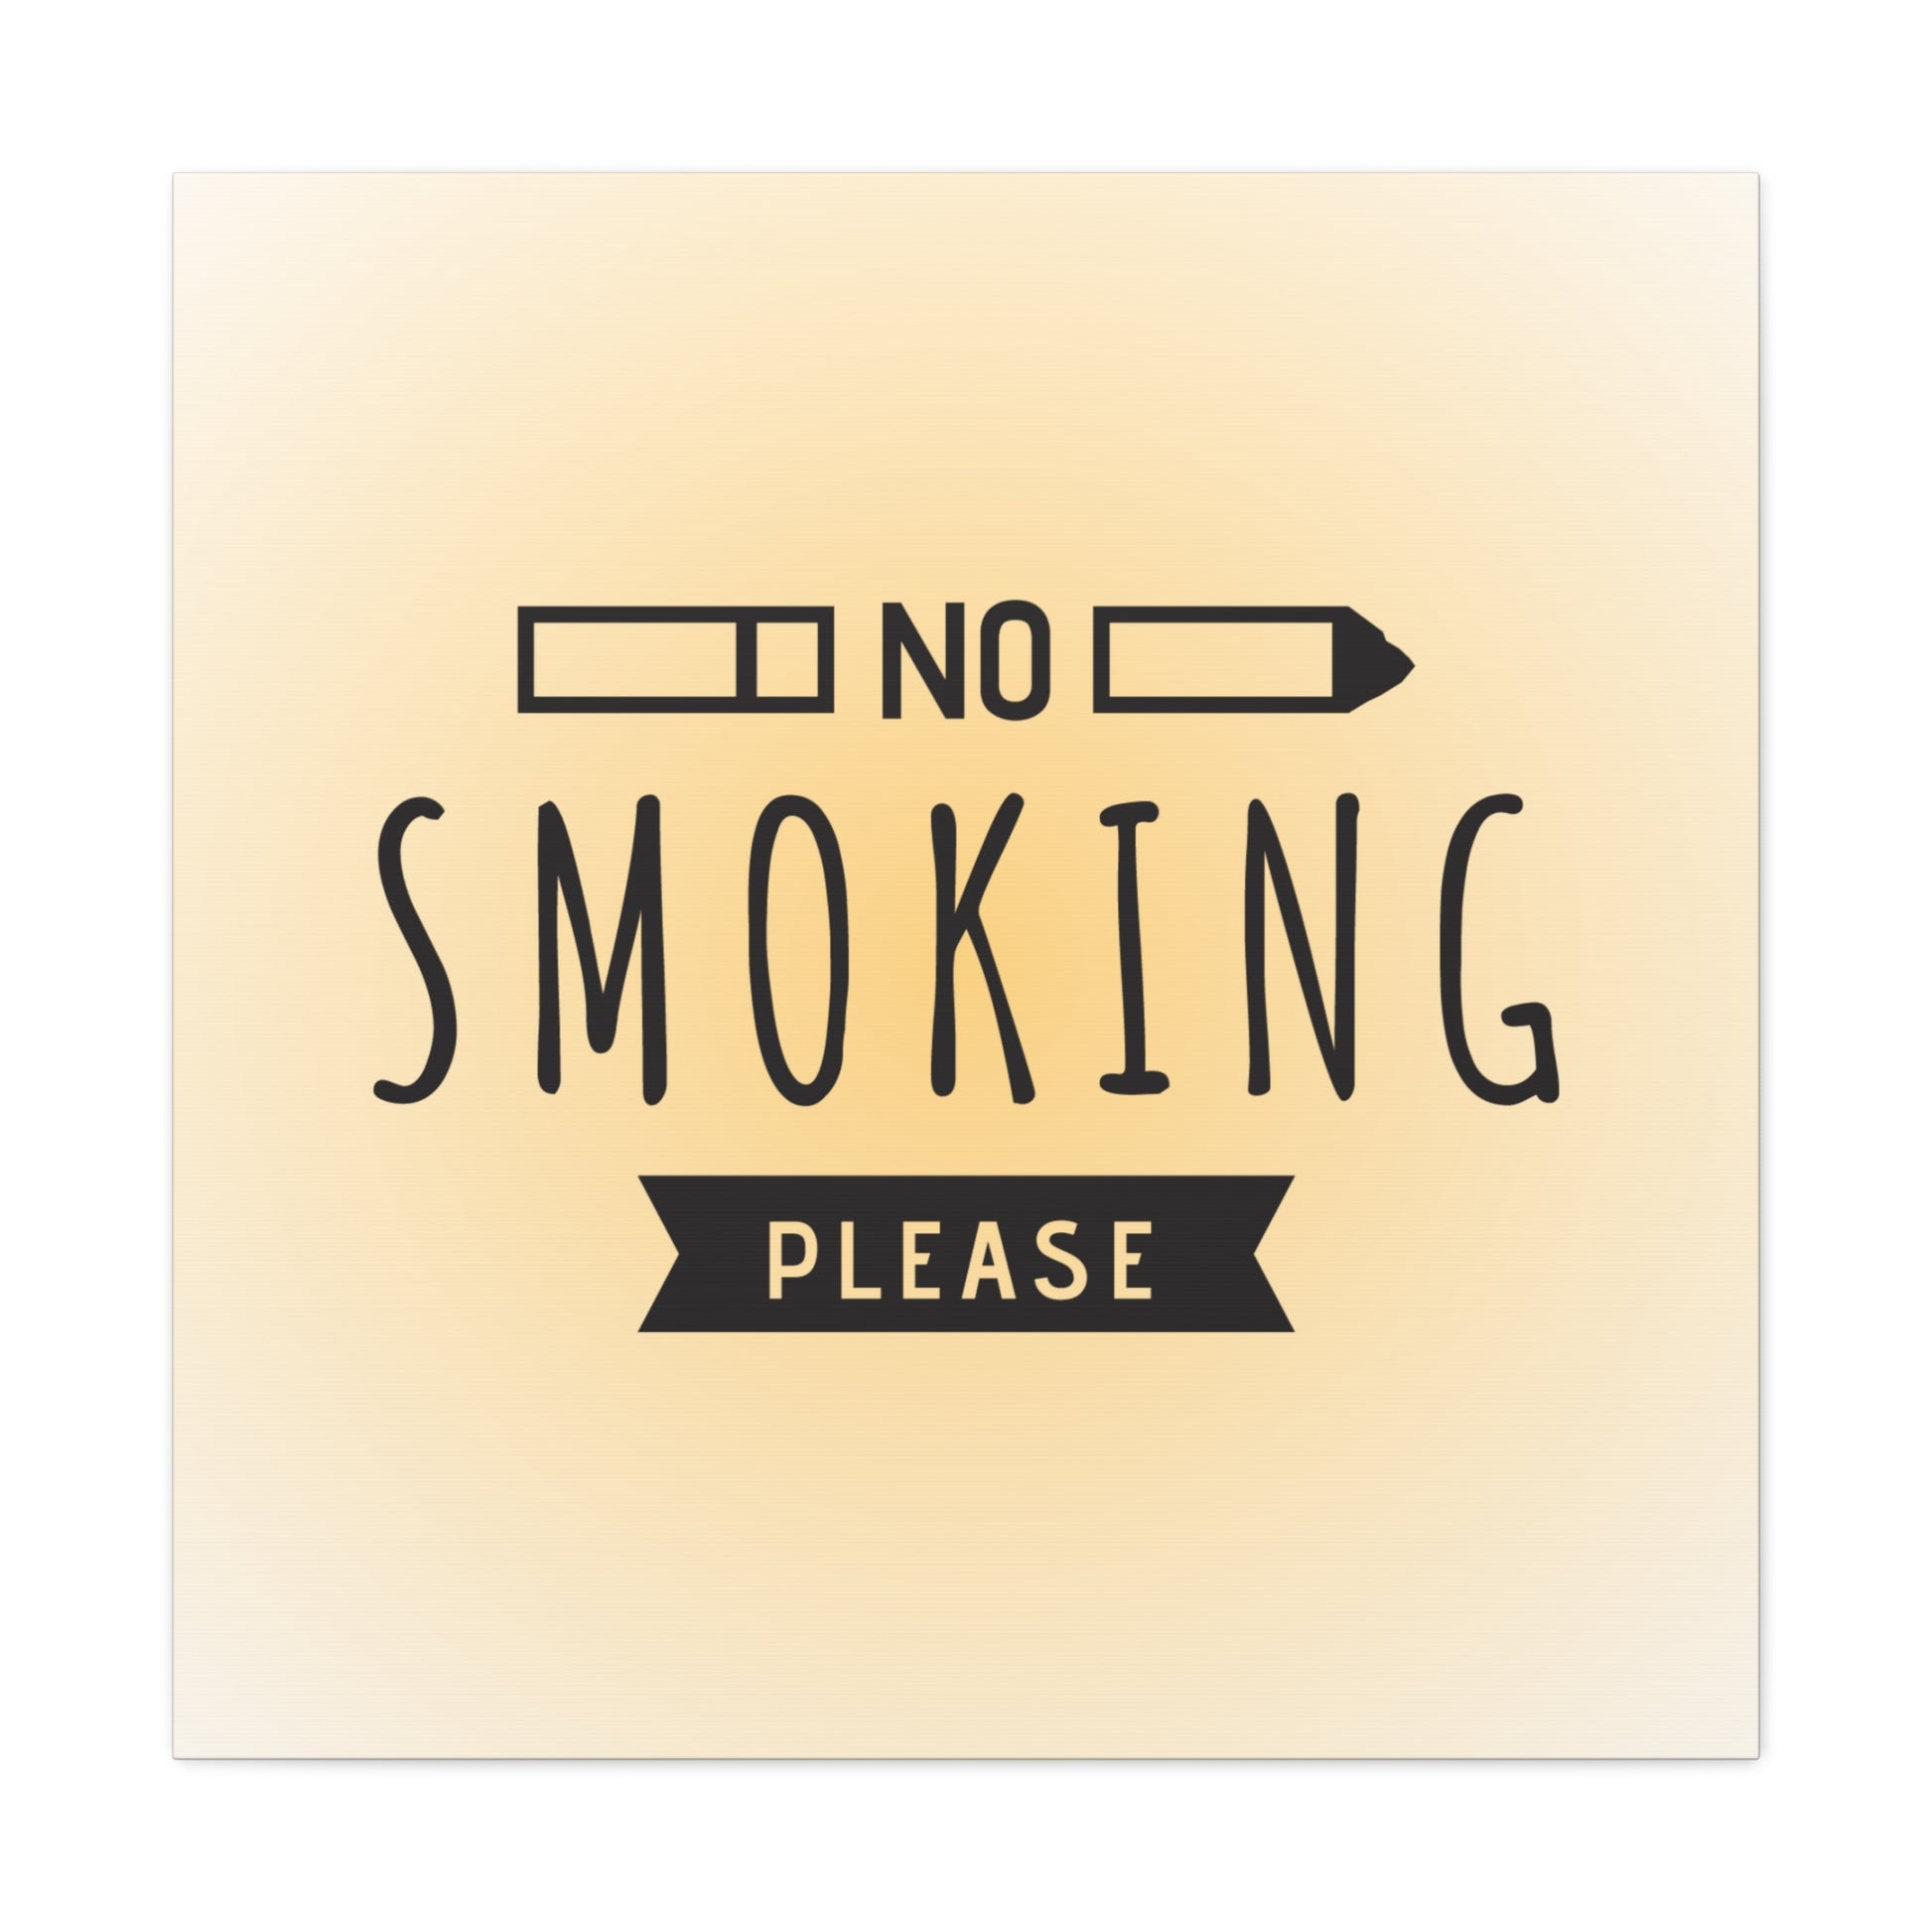 "No Smoking Please" Wall Art - Weave Got Gifts - Unique Gifts You Won’t Find Anywhere Else!